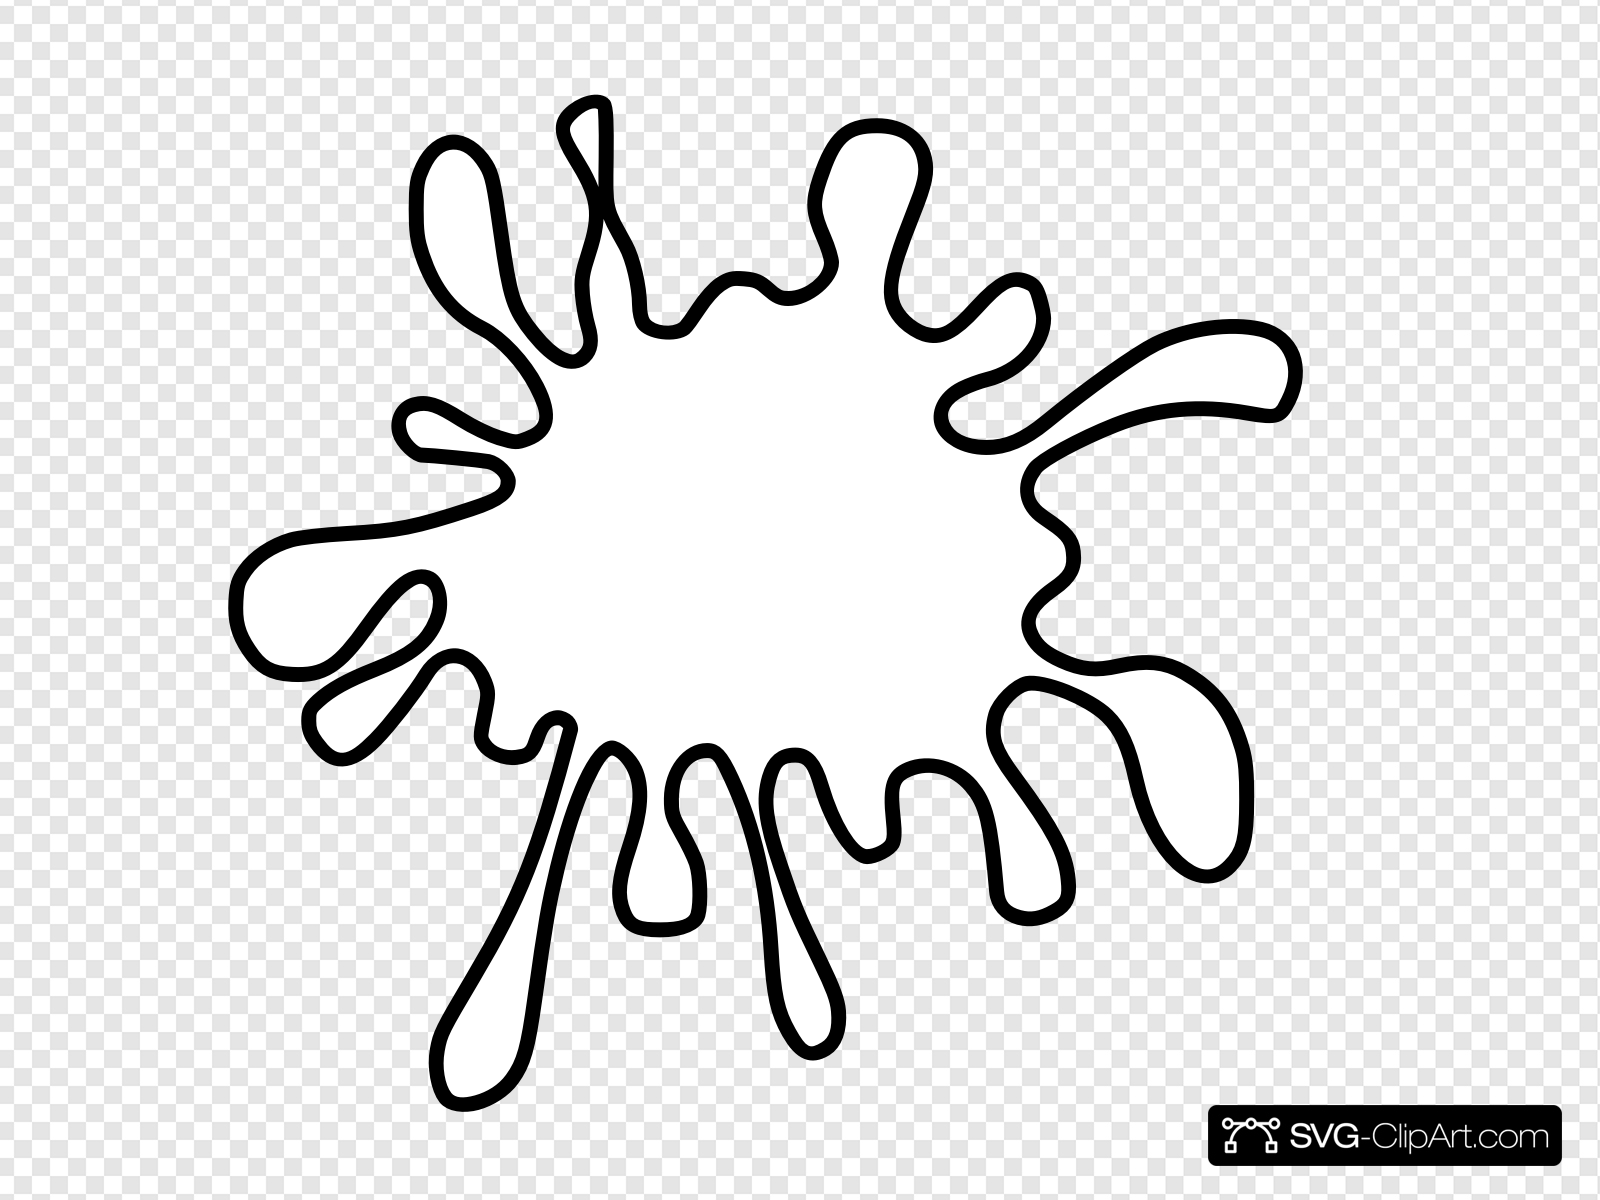 Splat Outline Clip art, Icon and SVG